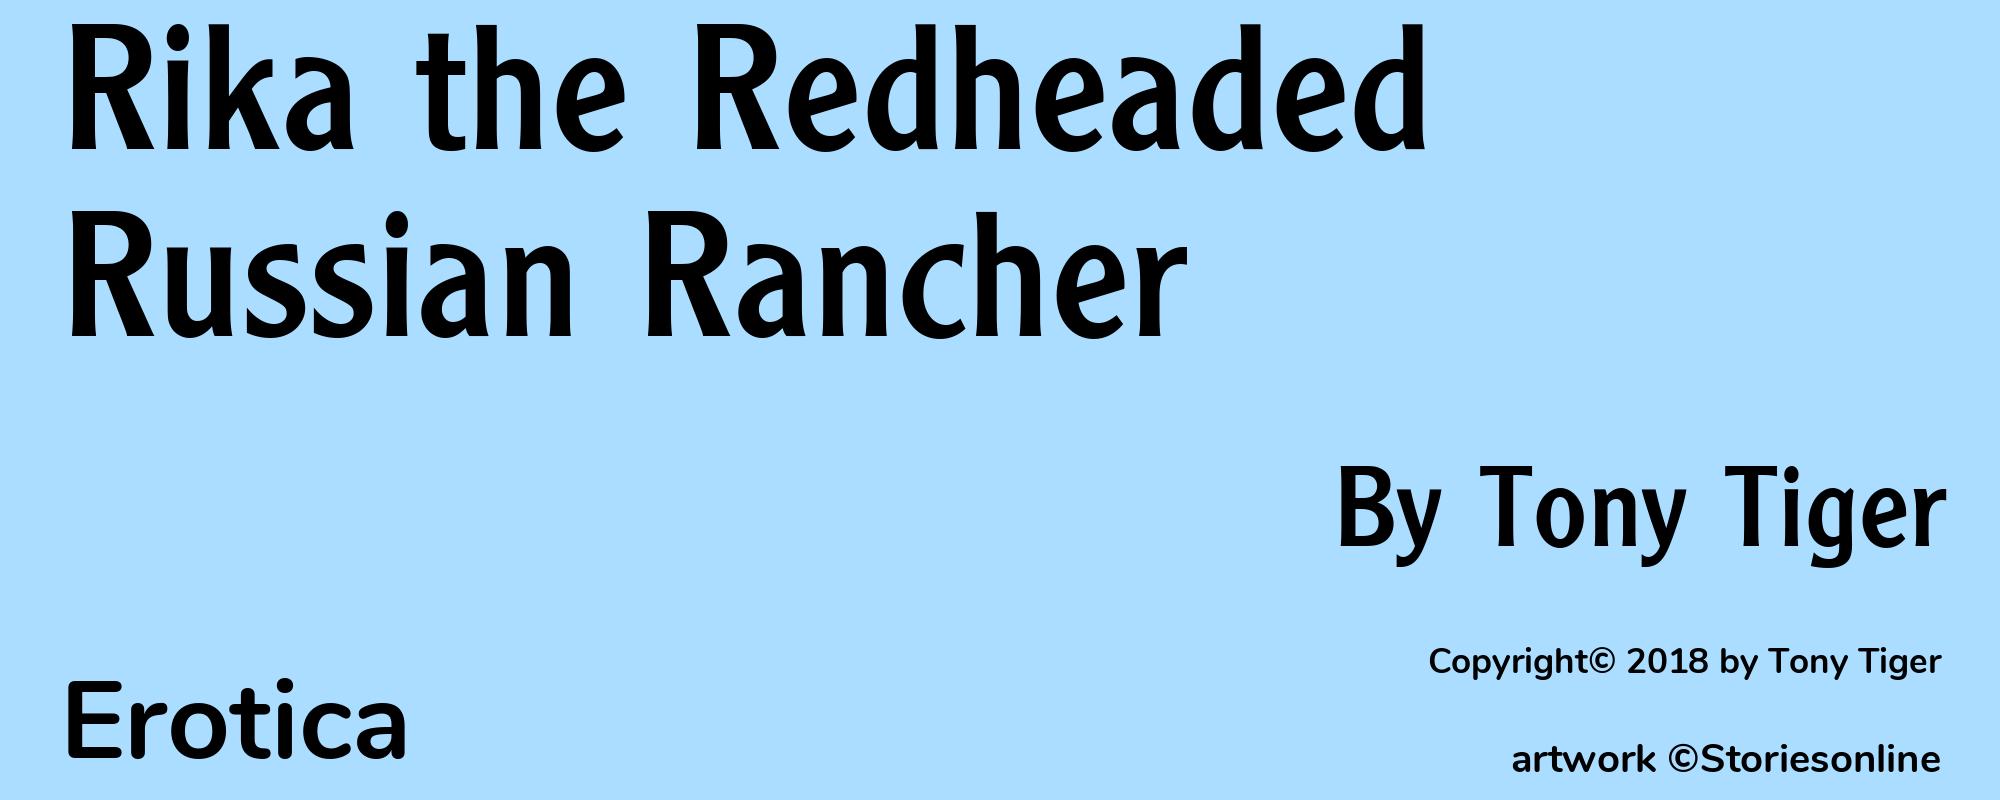 Rika the Redheaded Russian Rancher - Cover